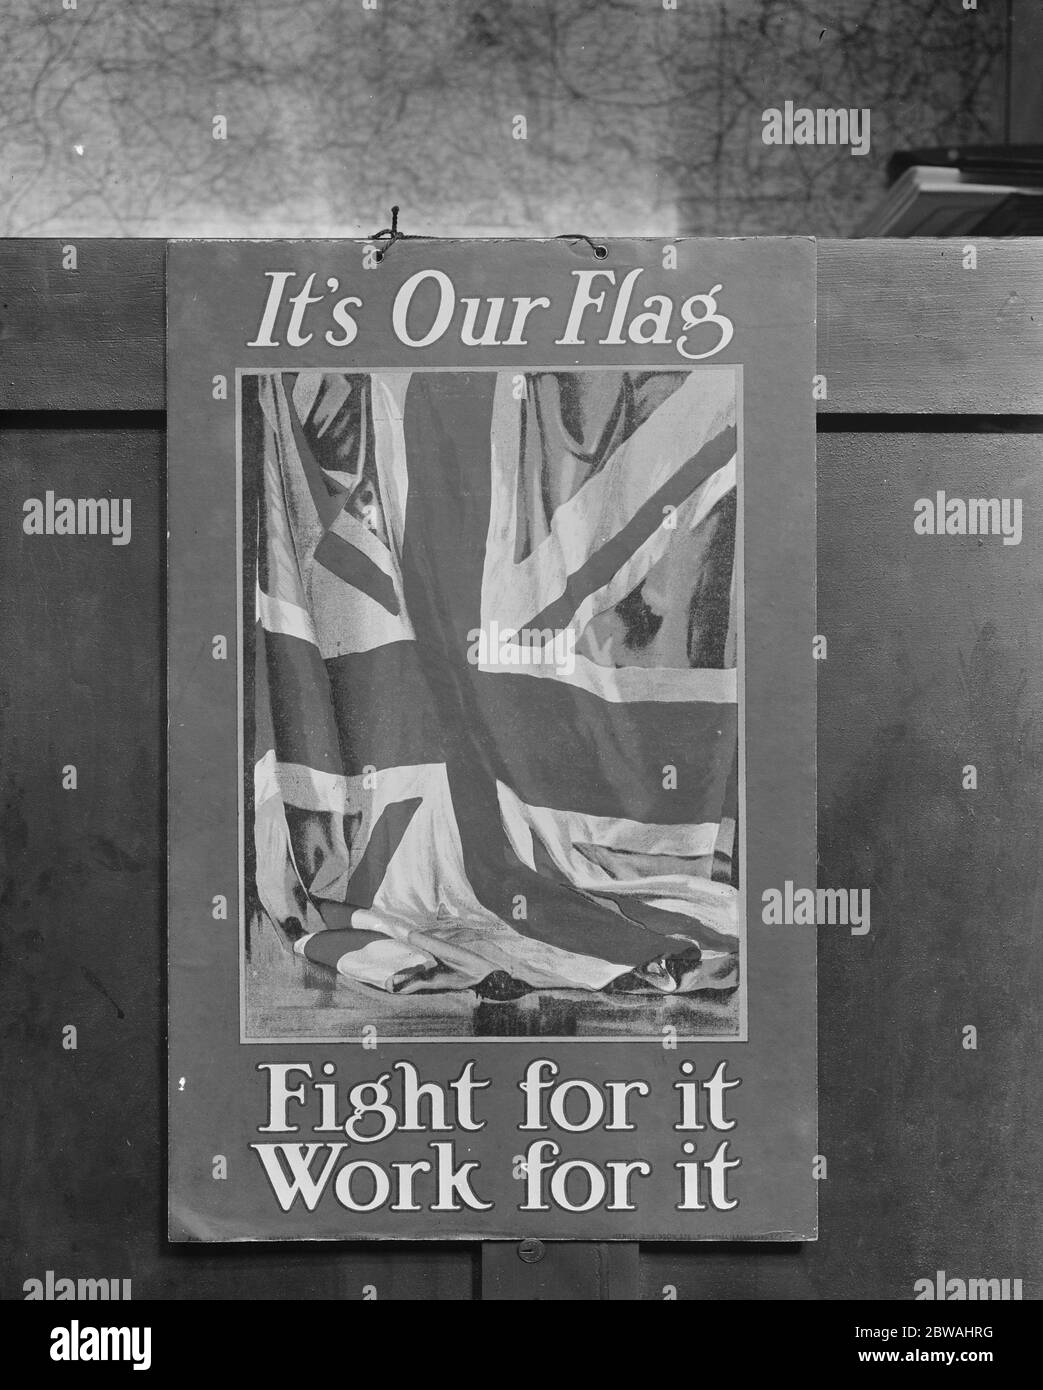 Recruiting poster It's our flag fight for it work for it Stock Photo